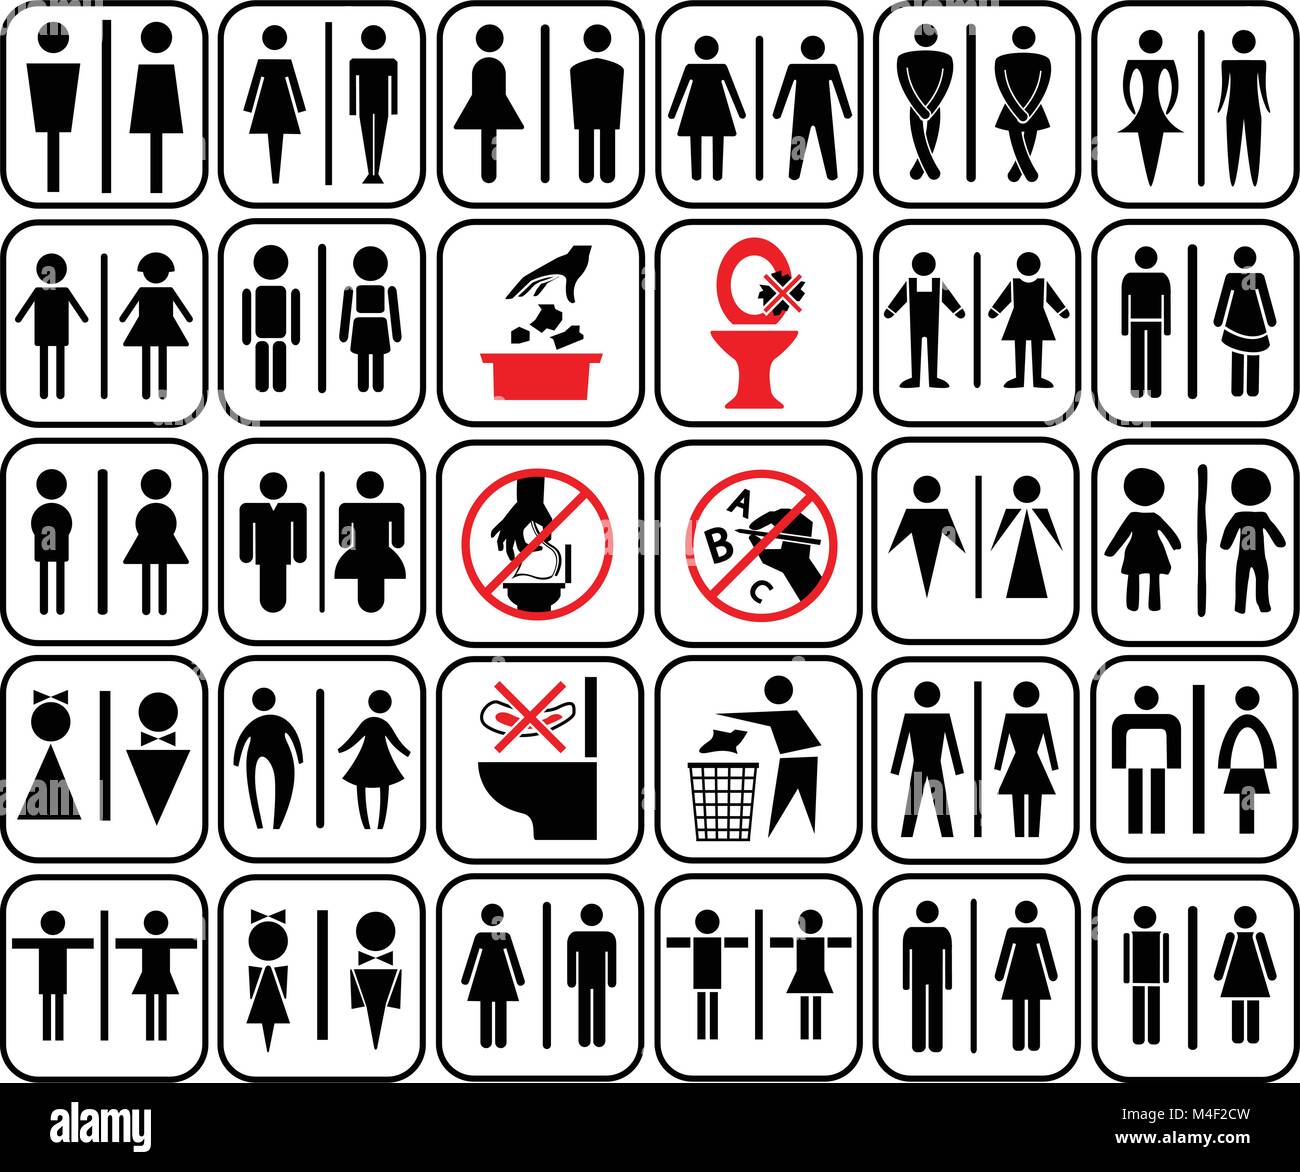 modern style of toilet sign with baby, men, women, pregnant women, aged, handicapped in art style design and access use warning in toilet , vector set Stock Vector